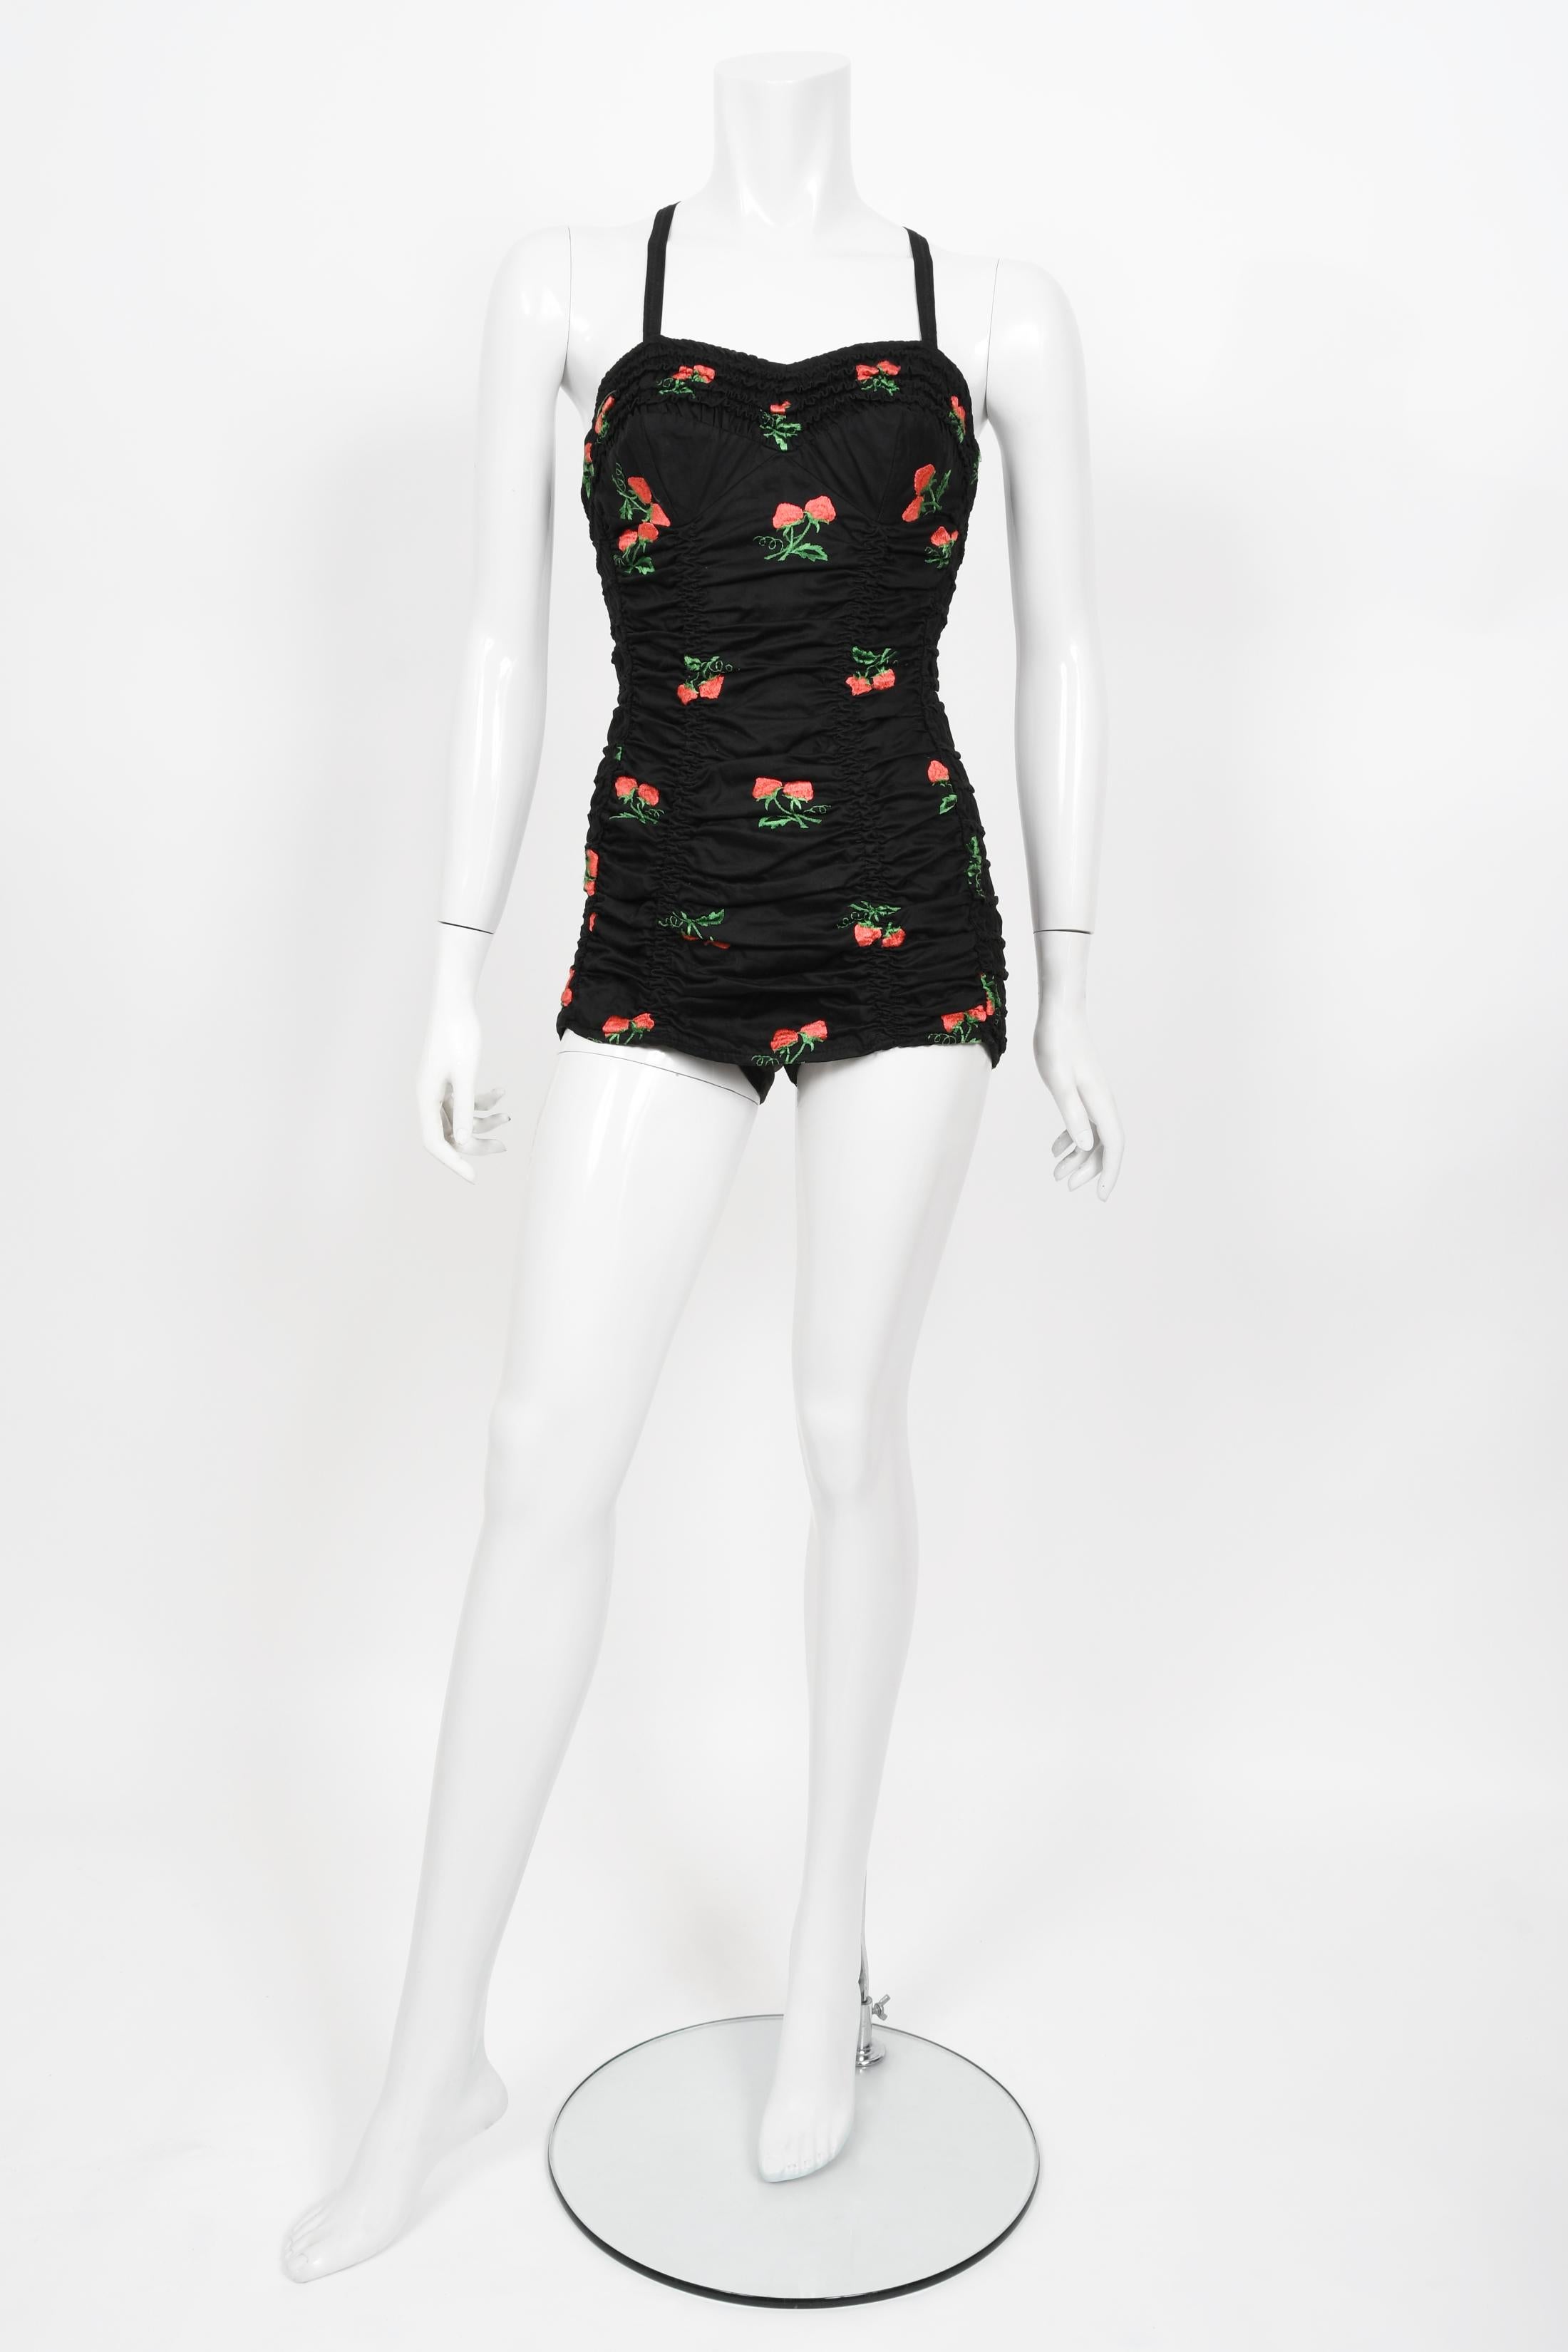 Words can not describe how beautiful this 1950's Jantzen swimsuit ensemble is. The bathing suit is made from a high-grade ruched stretch polished cotton blend fabric with adorable strawberries embroidered throughout. It is cut in that classic pin-up